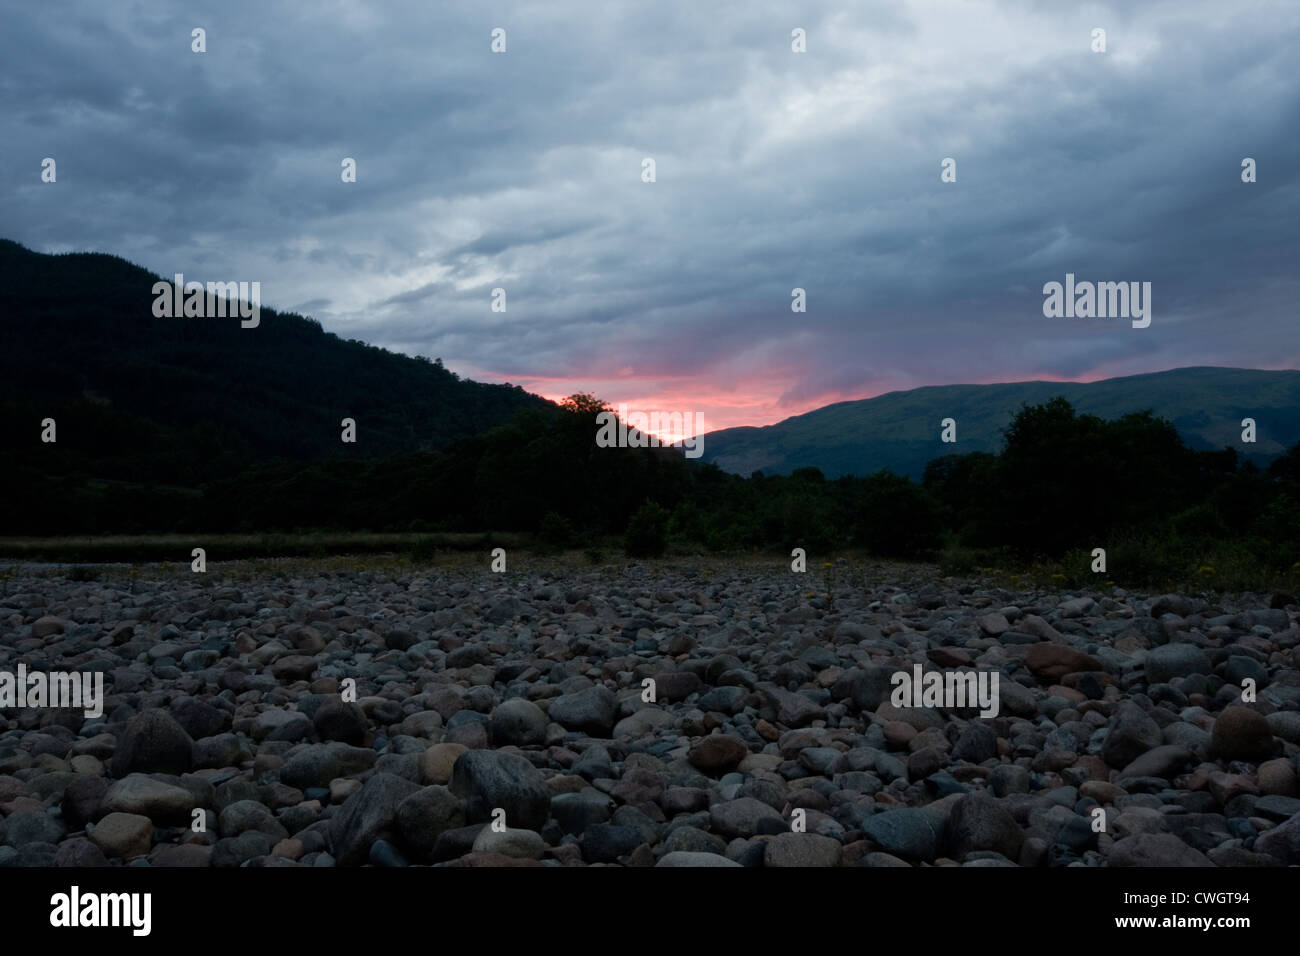 River at sunset, dark landscape with red clouds Stock Photo